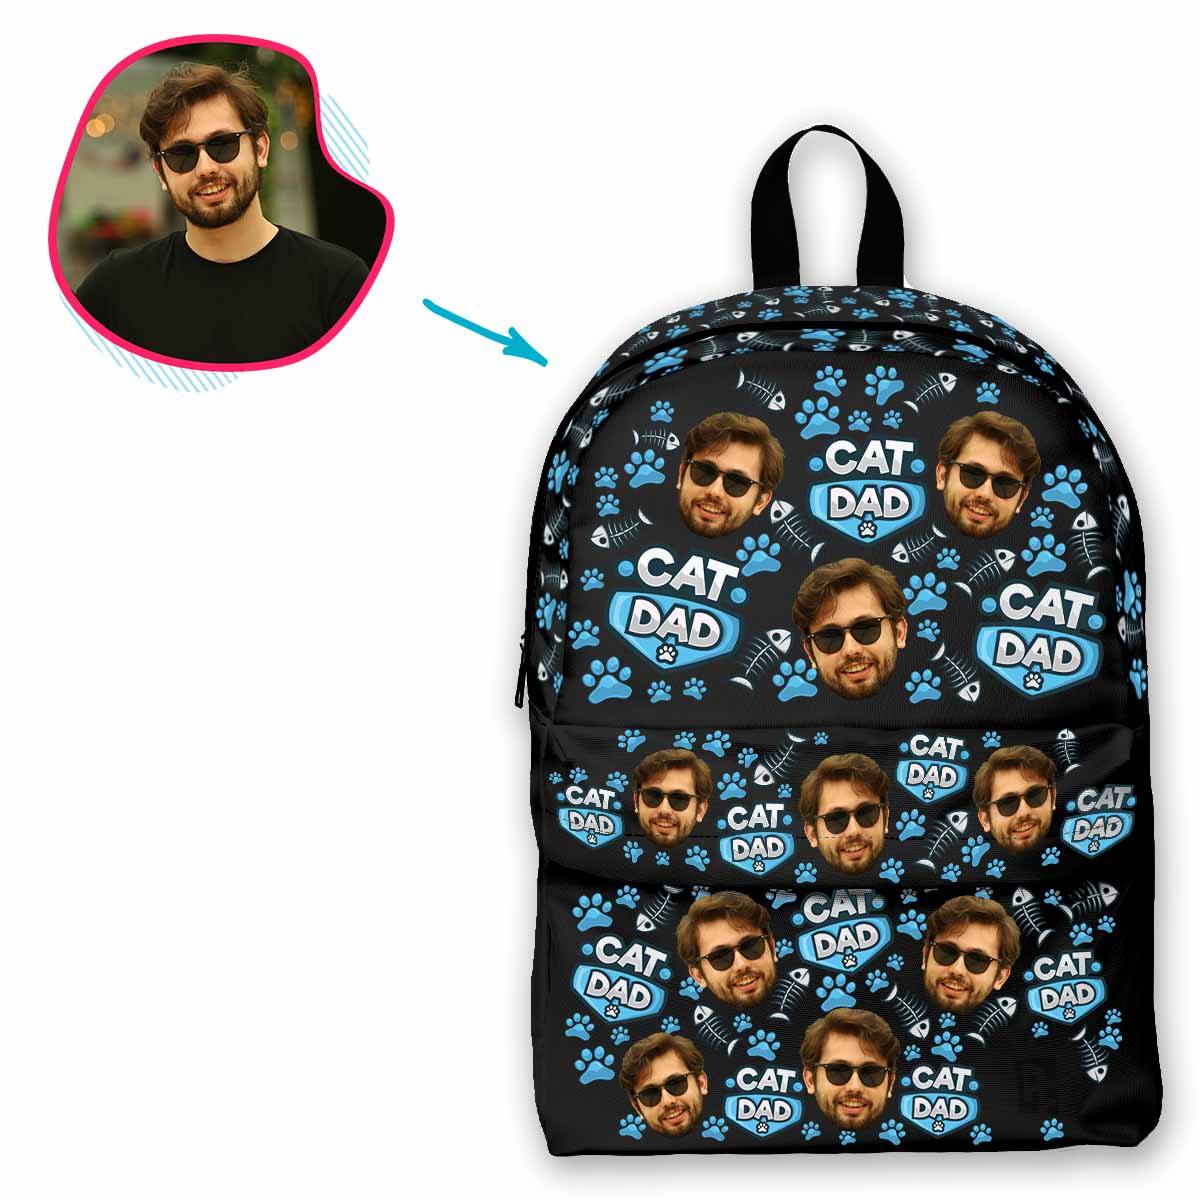 dark Cat Dad classic backpack personalized with photo of face printed on it